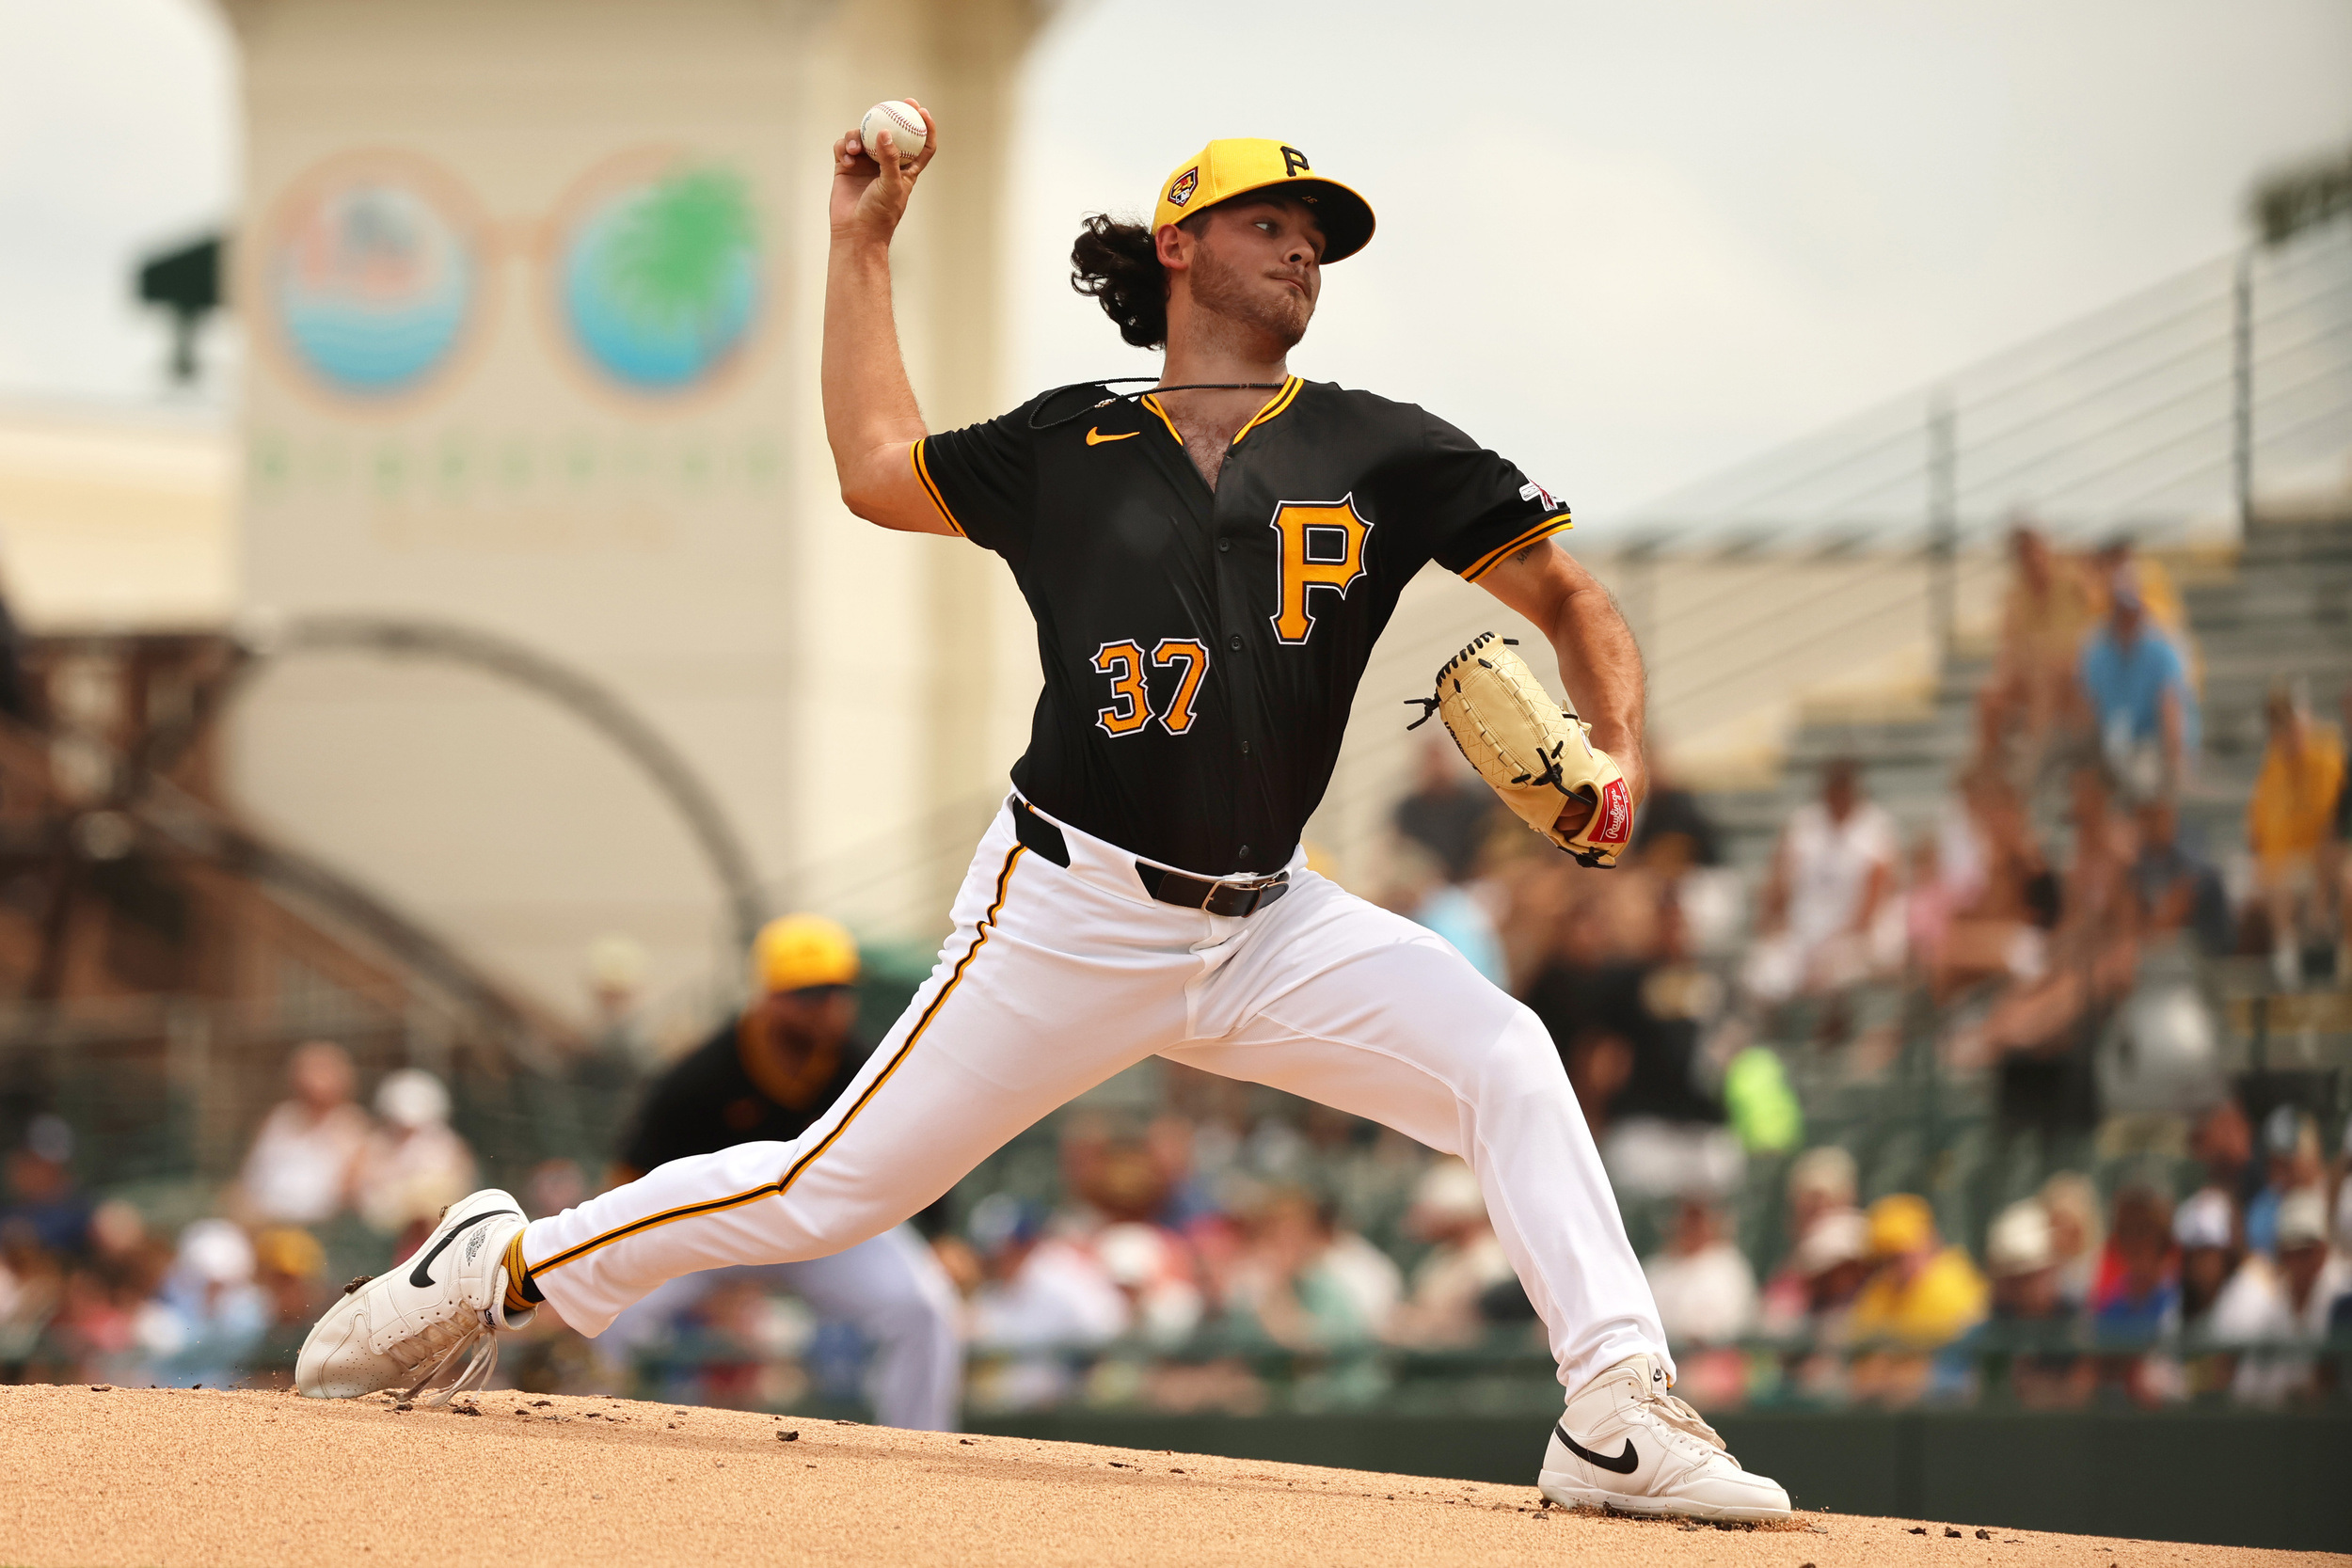 Pirates top pitching prospect earns spot on Opening Day roster